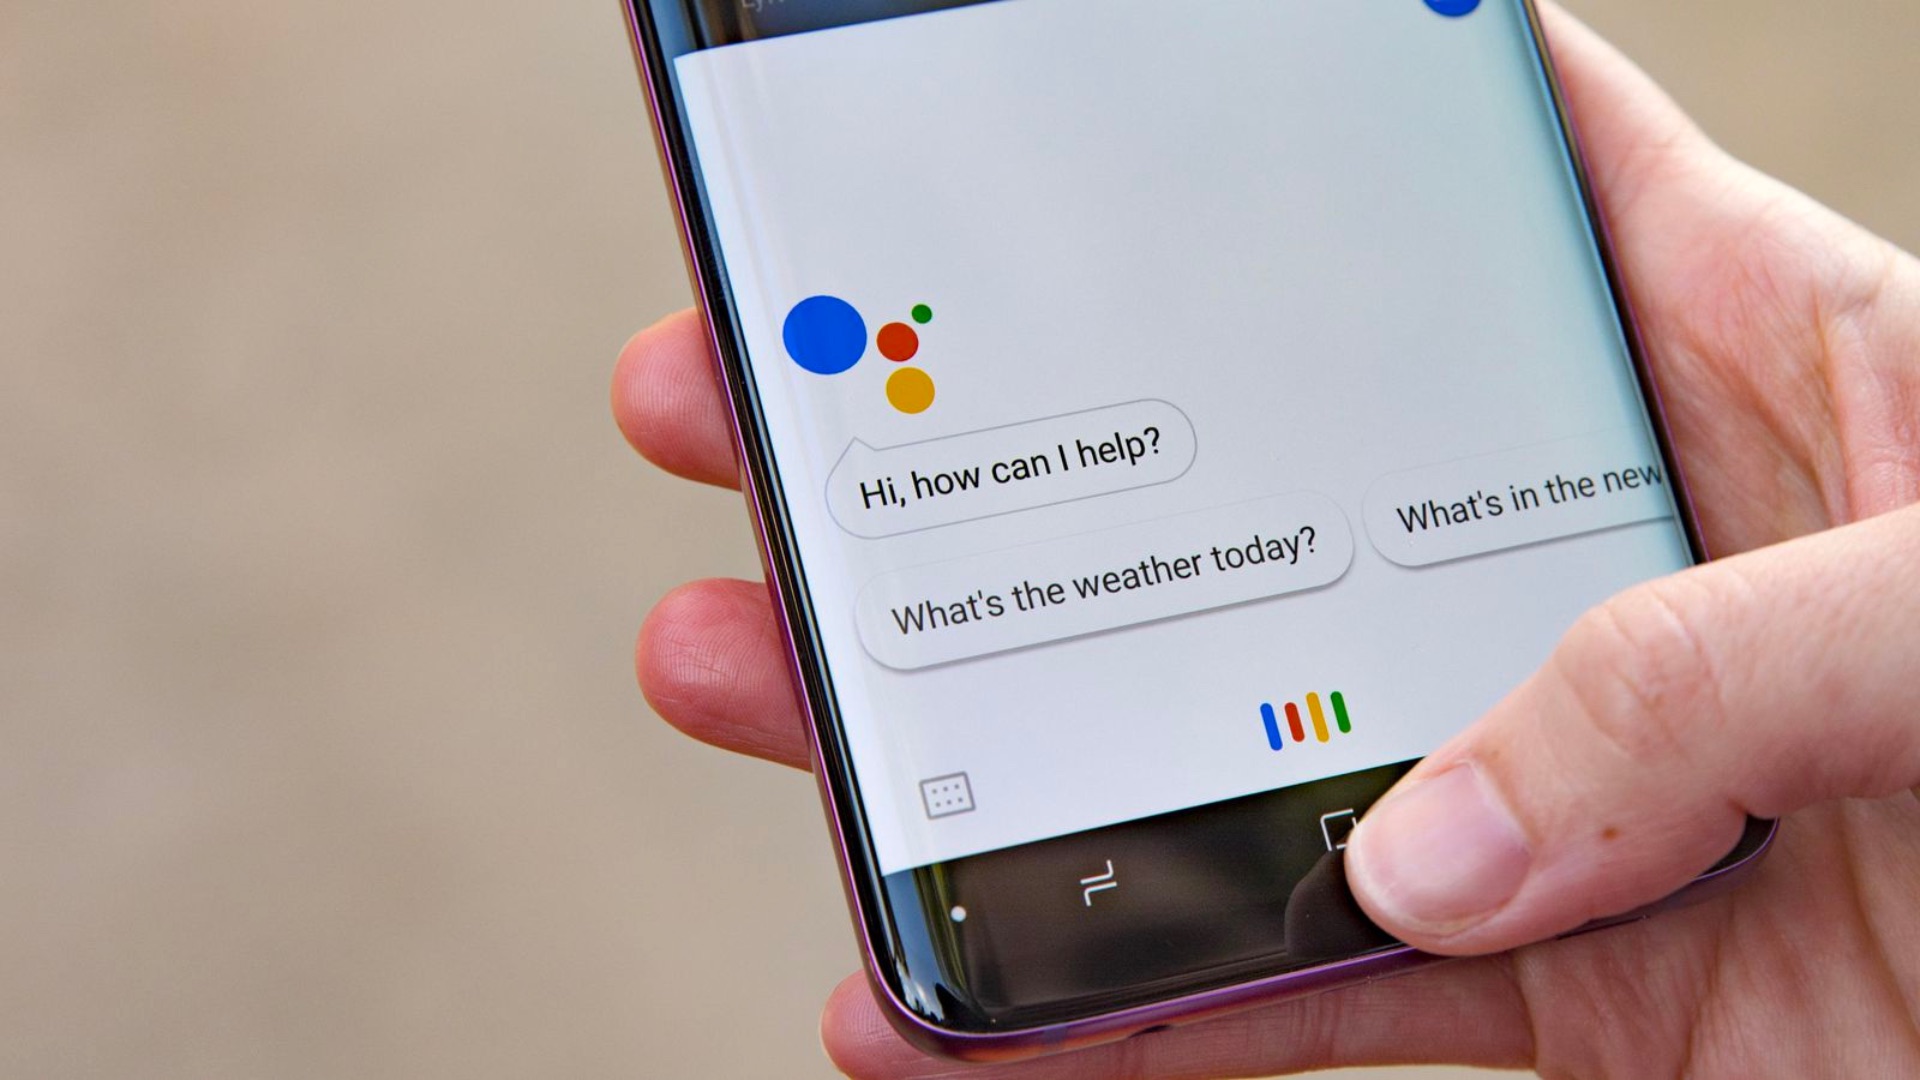 integrates with the Google Assistant